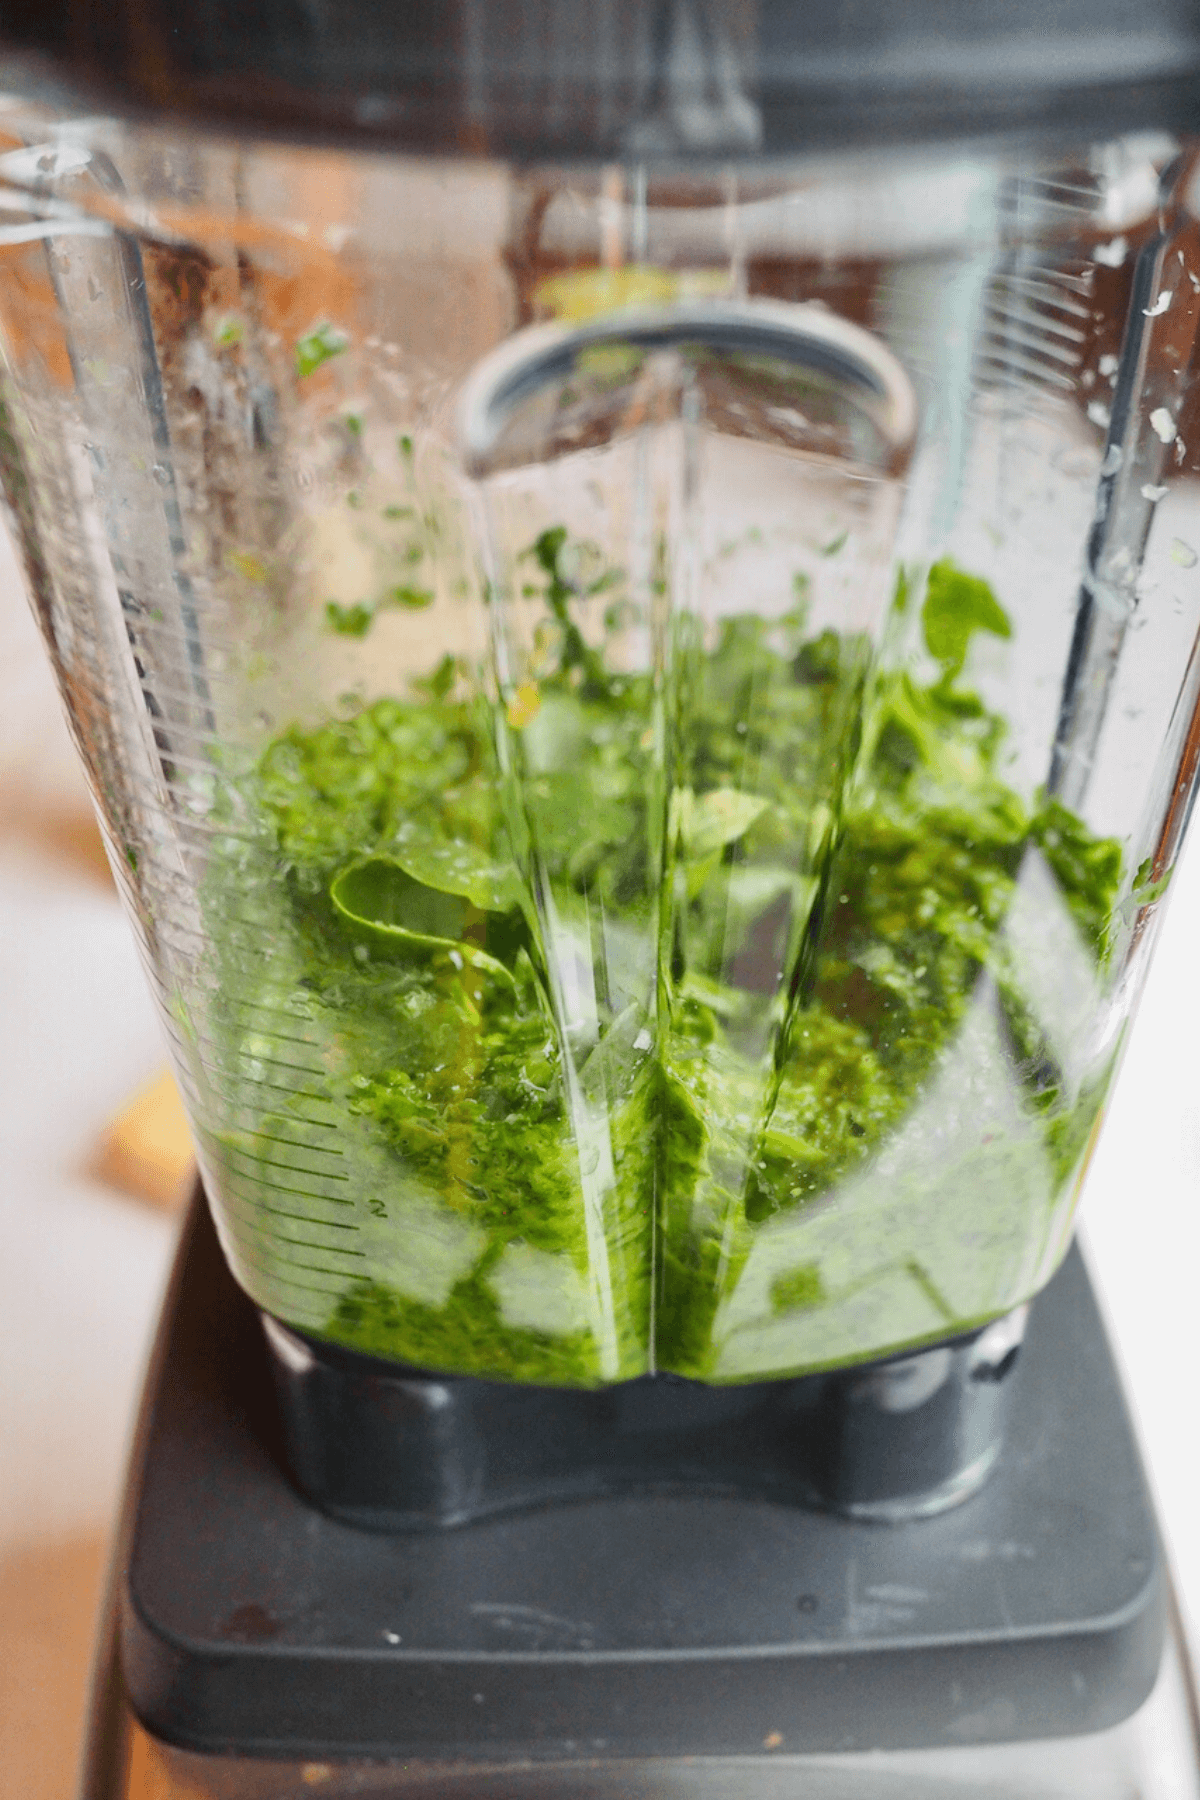 Blending or processing the spinach, basil and other pesto ingredients in blender. 